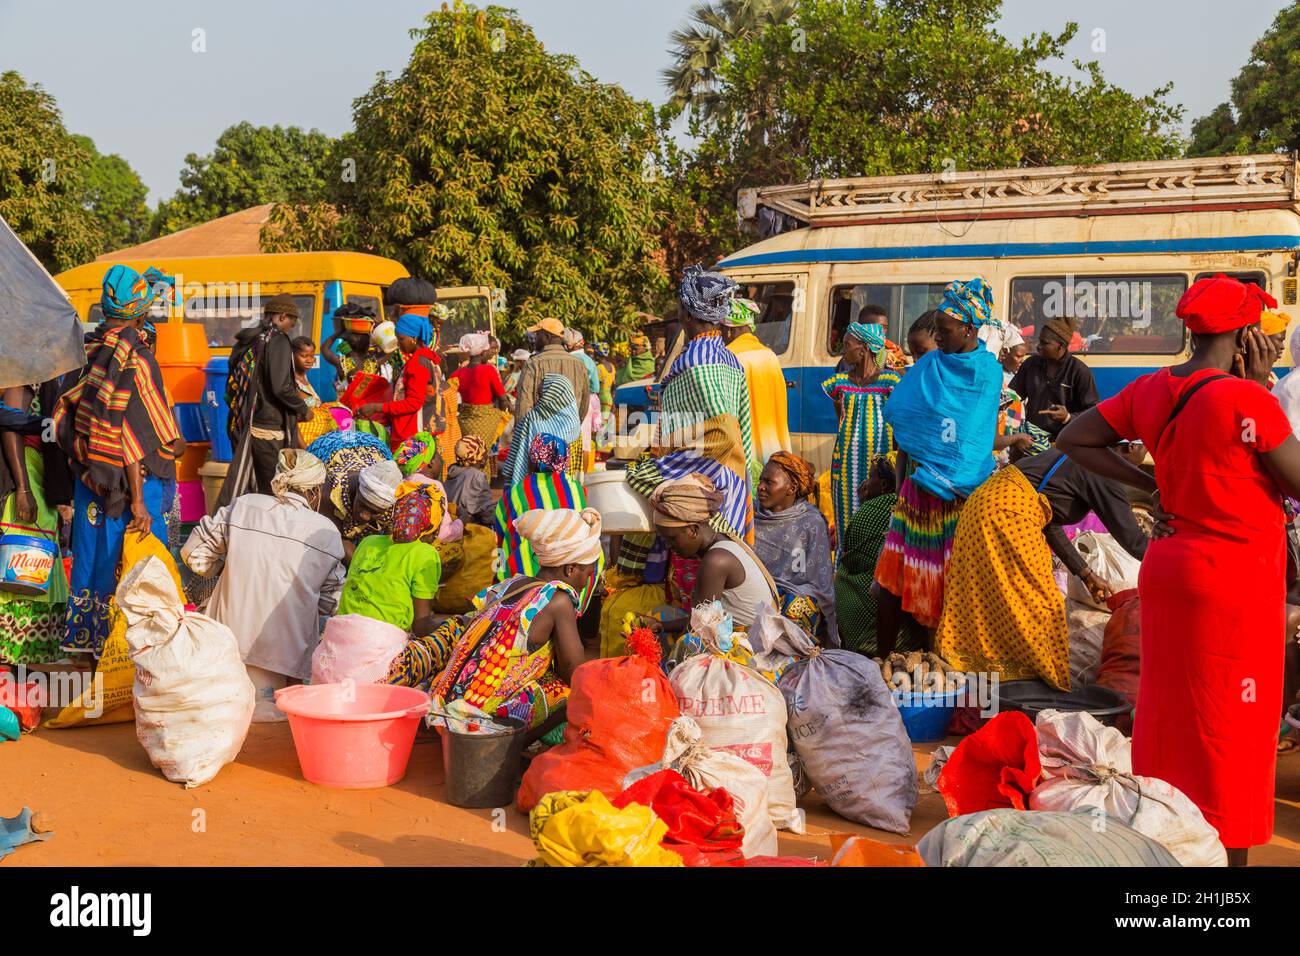 Bissau, Republic of Guinea-Bissau - January 6, 2020: Street scene in the city of Bissau with people at the street market, Guinea Bissau Stock Photo